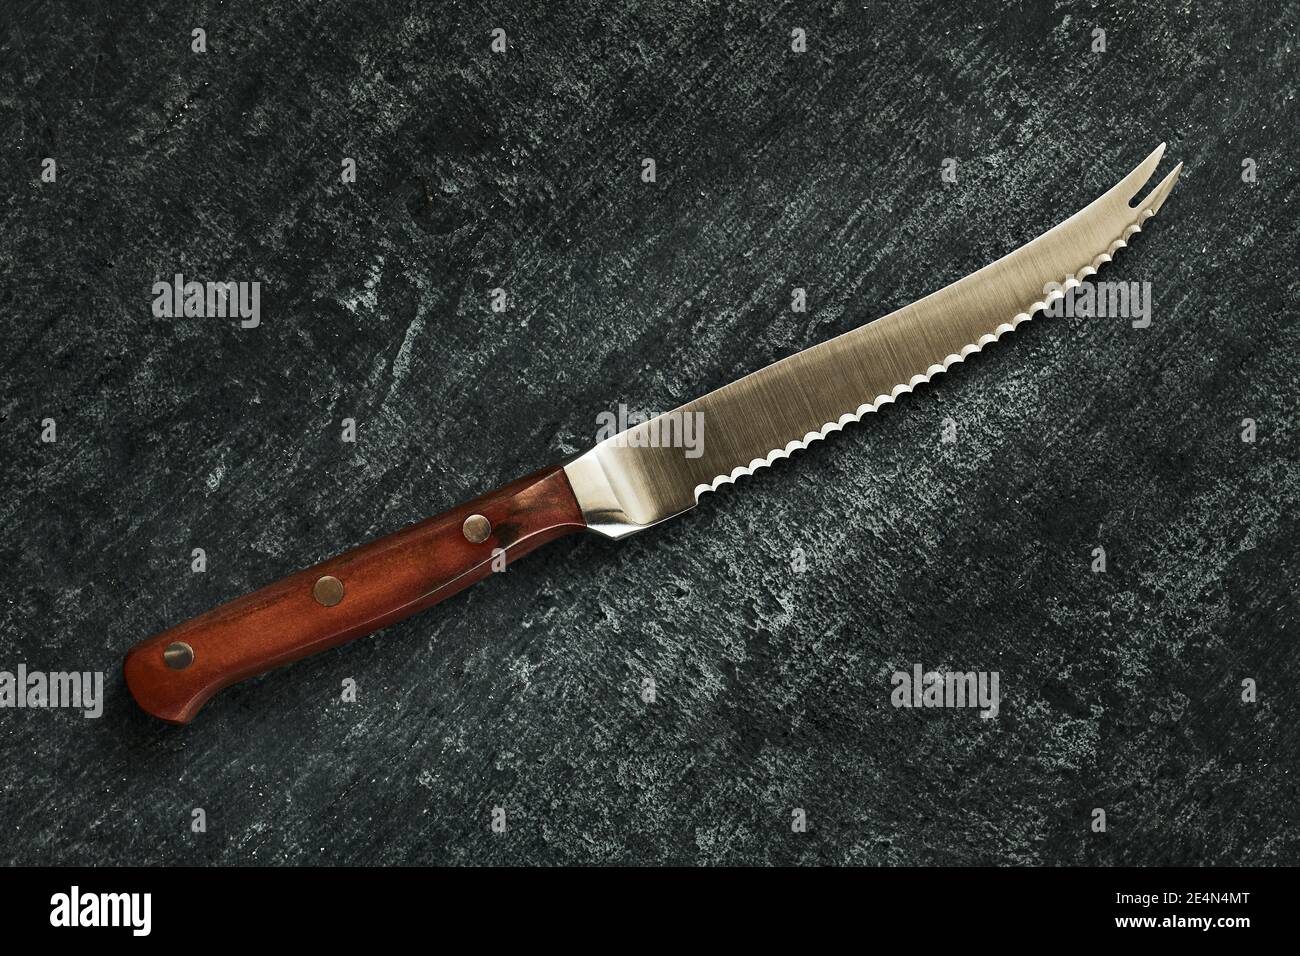 Specialized chefs kitchen tomato knife on gray grunge background, close up, top view Stock Photo